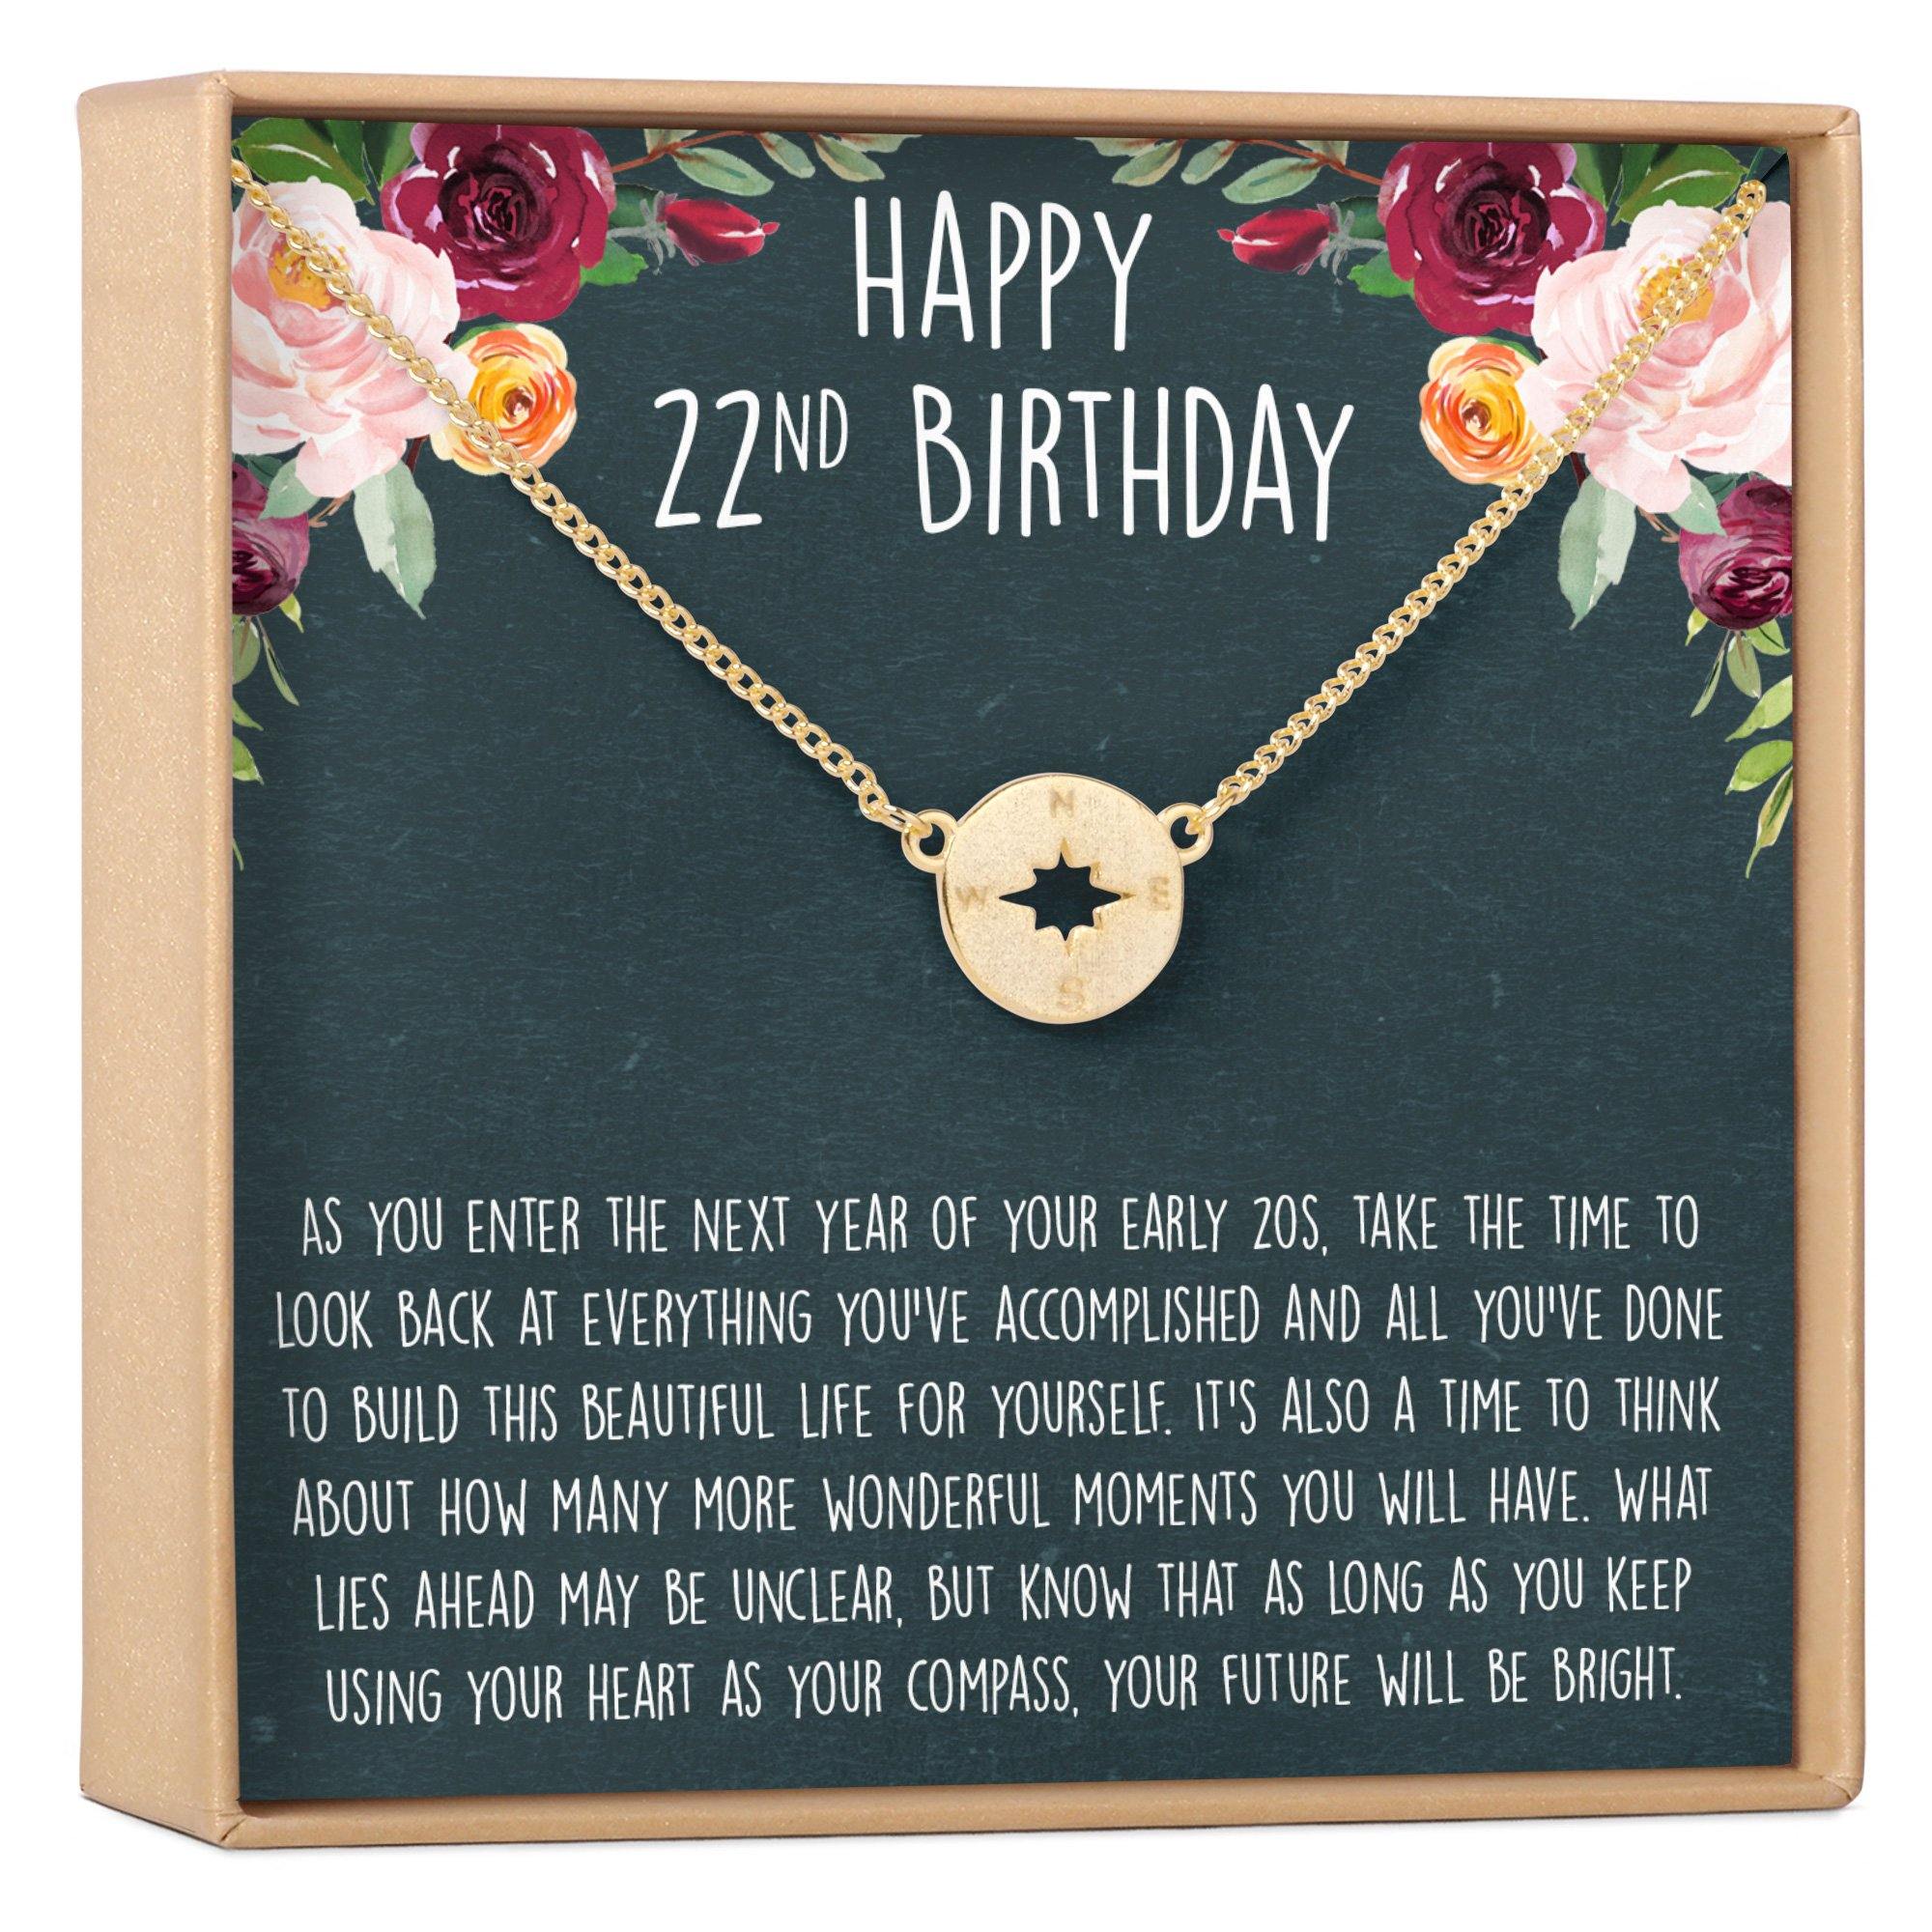 22nd Birthday Gift Necklace: Birthday Gift, Jewelry Gift For Her, Compass - Dear Ava